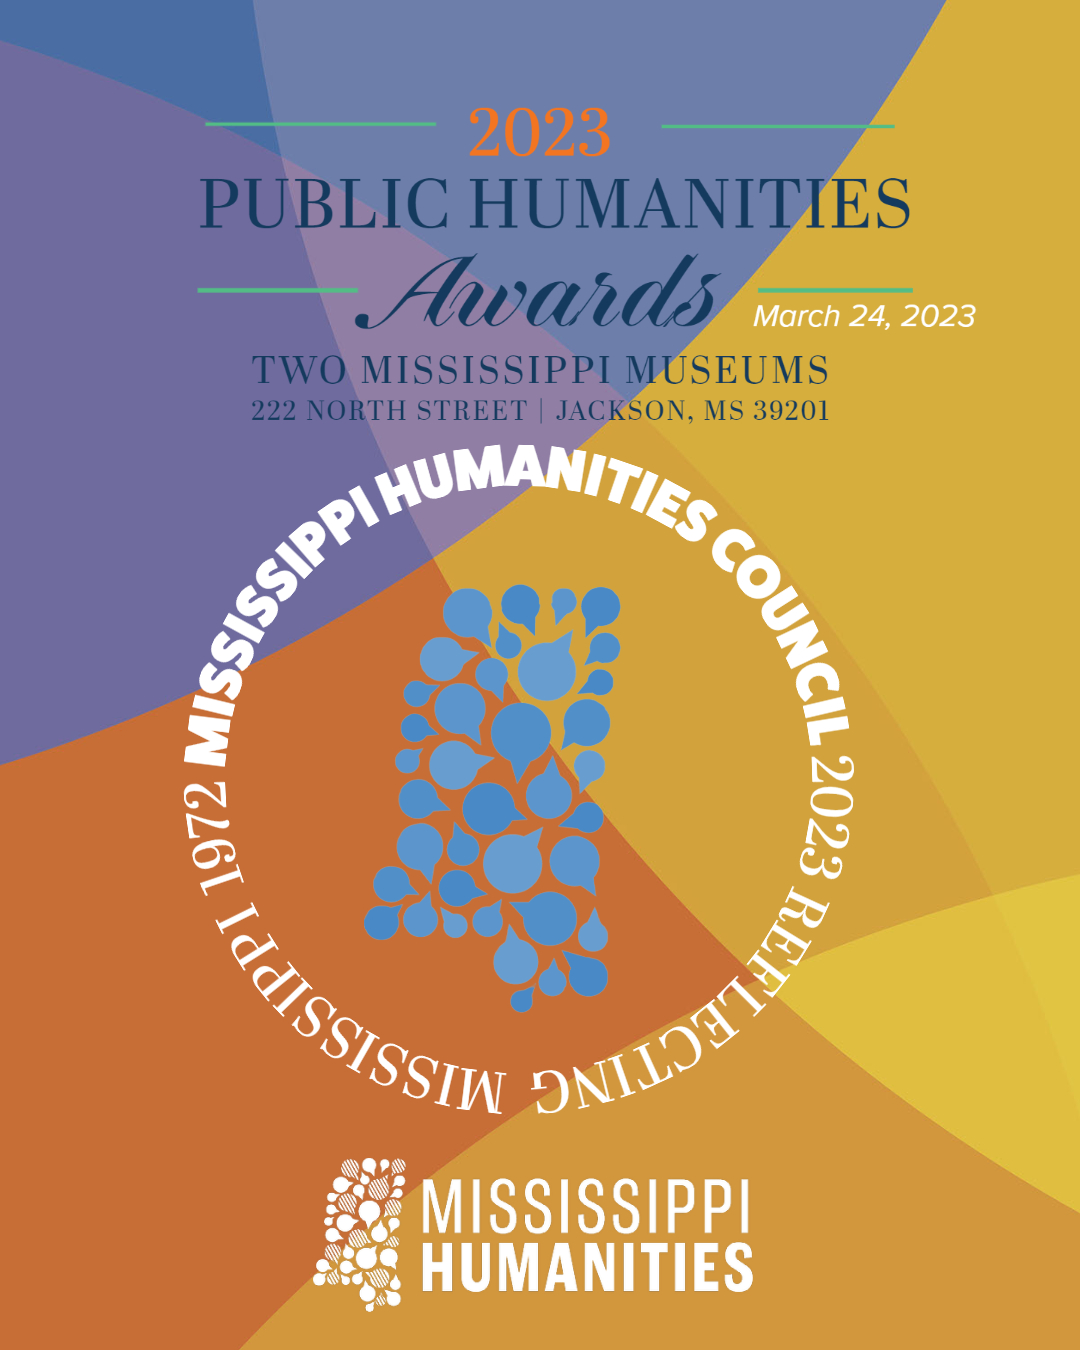 Mississippi Humanities